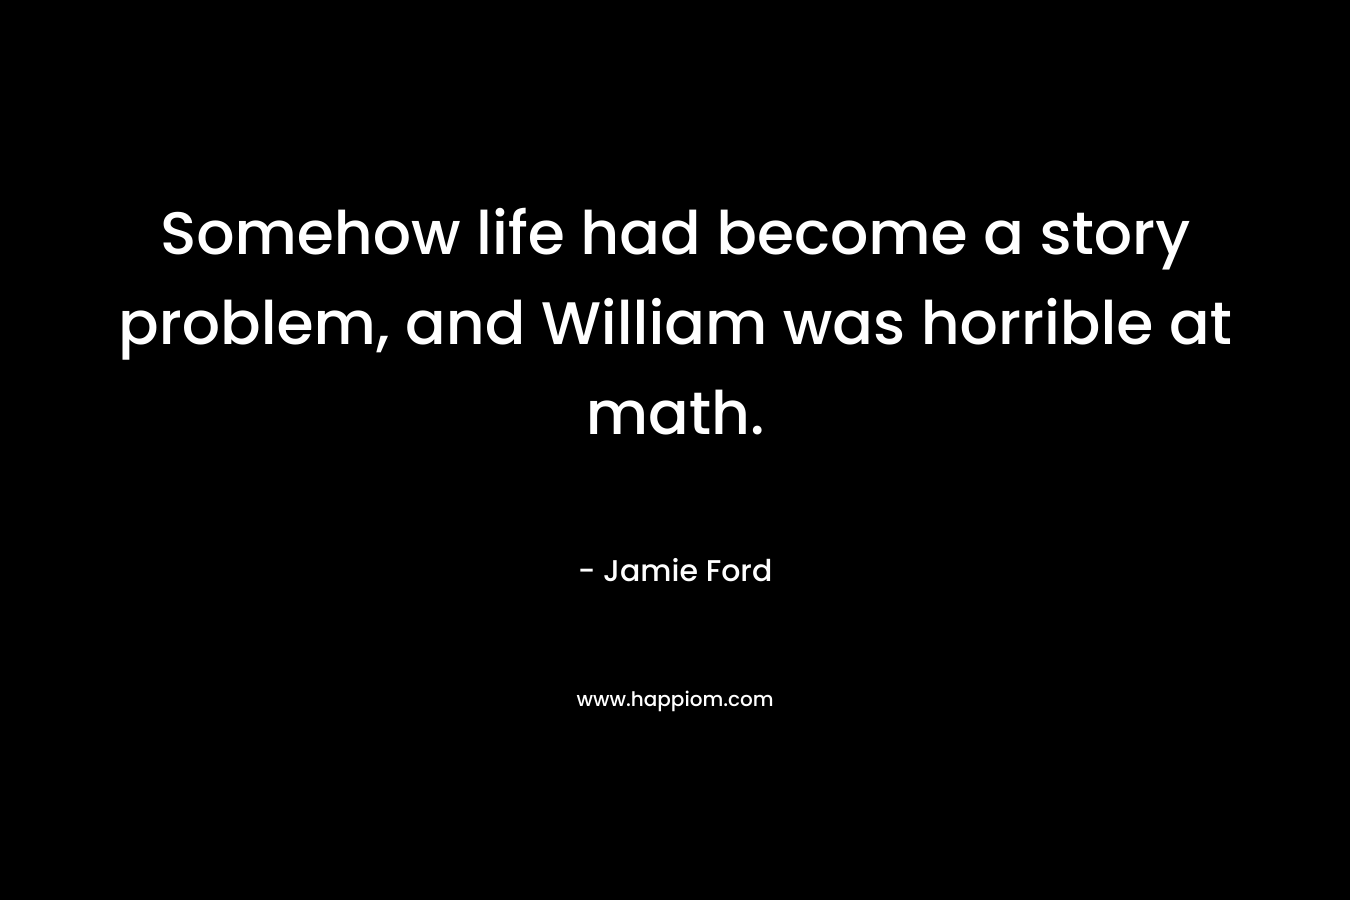 Somehow life had become a story problem, and William was horrible at math. – Jamie Ford